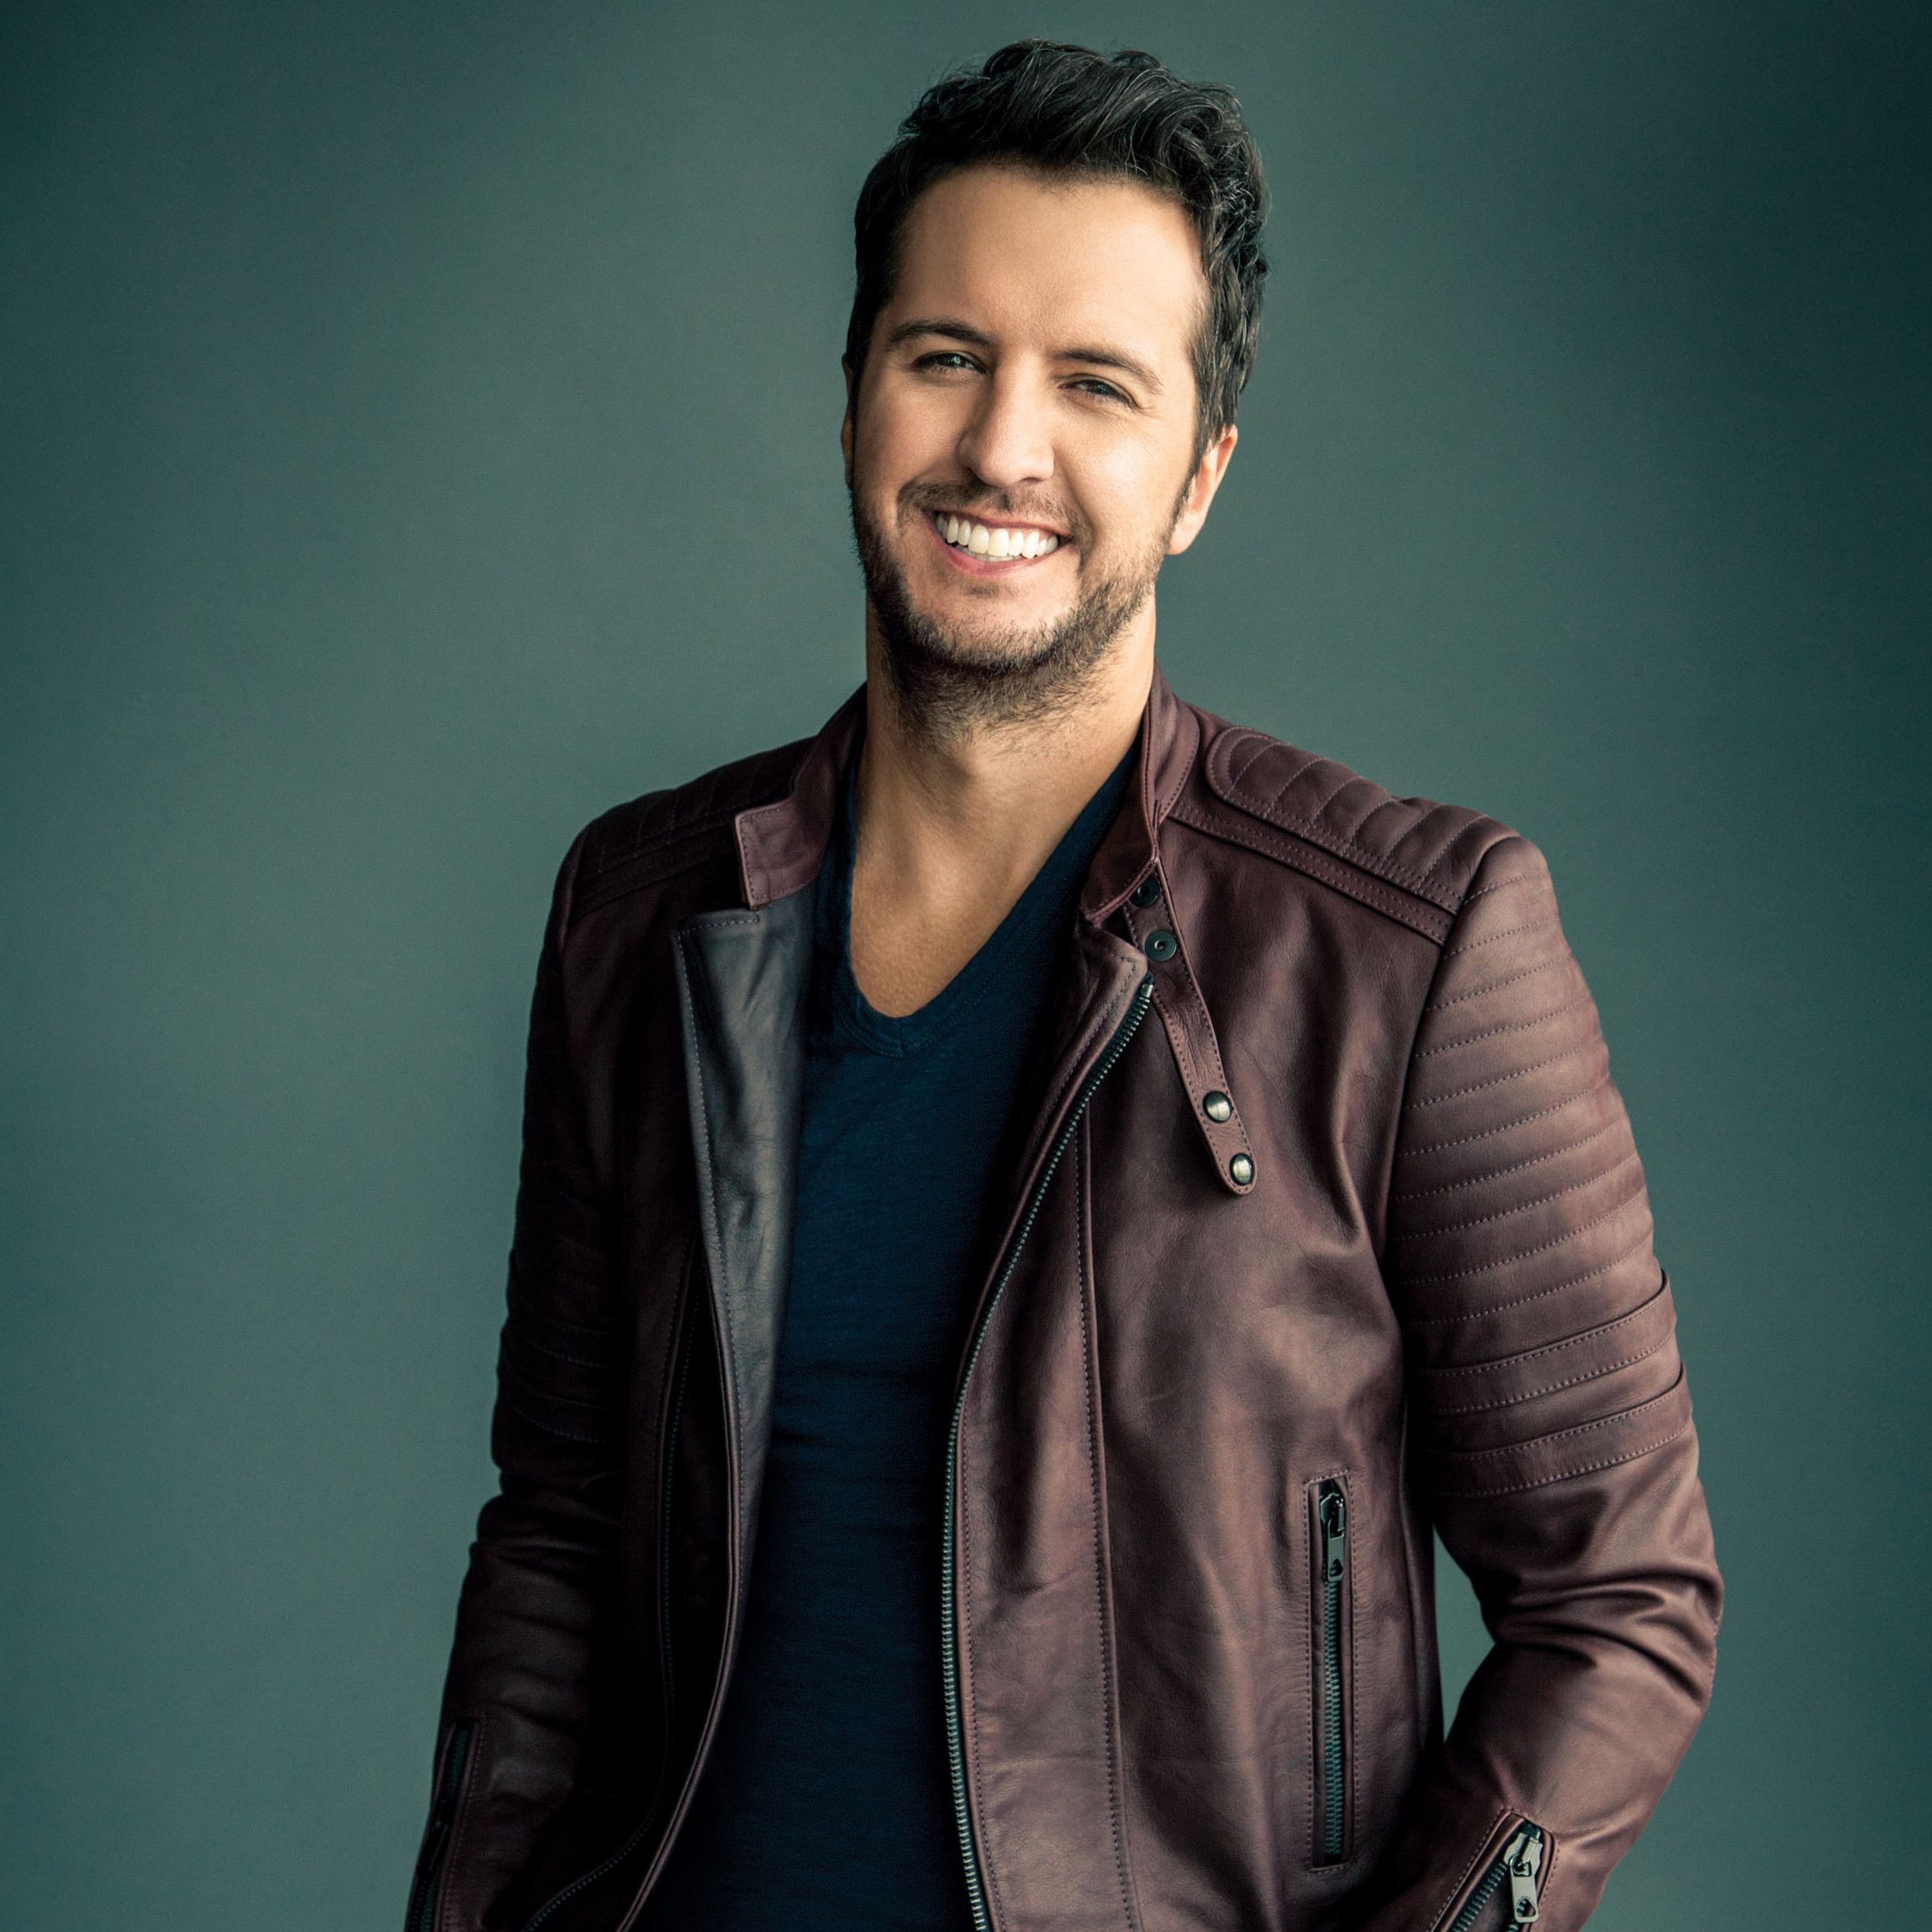 LUKE BRYAN LAUNCHES KILL THE LIGHTS WITH PERFORMANCES AND GROUND BREAKING DIGITAL FIRSTS